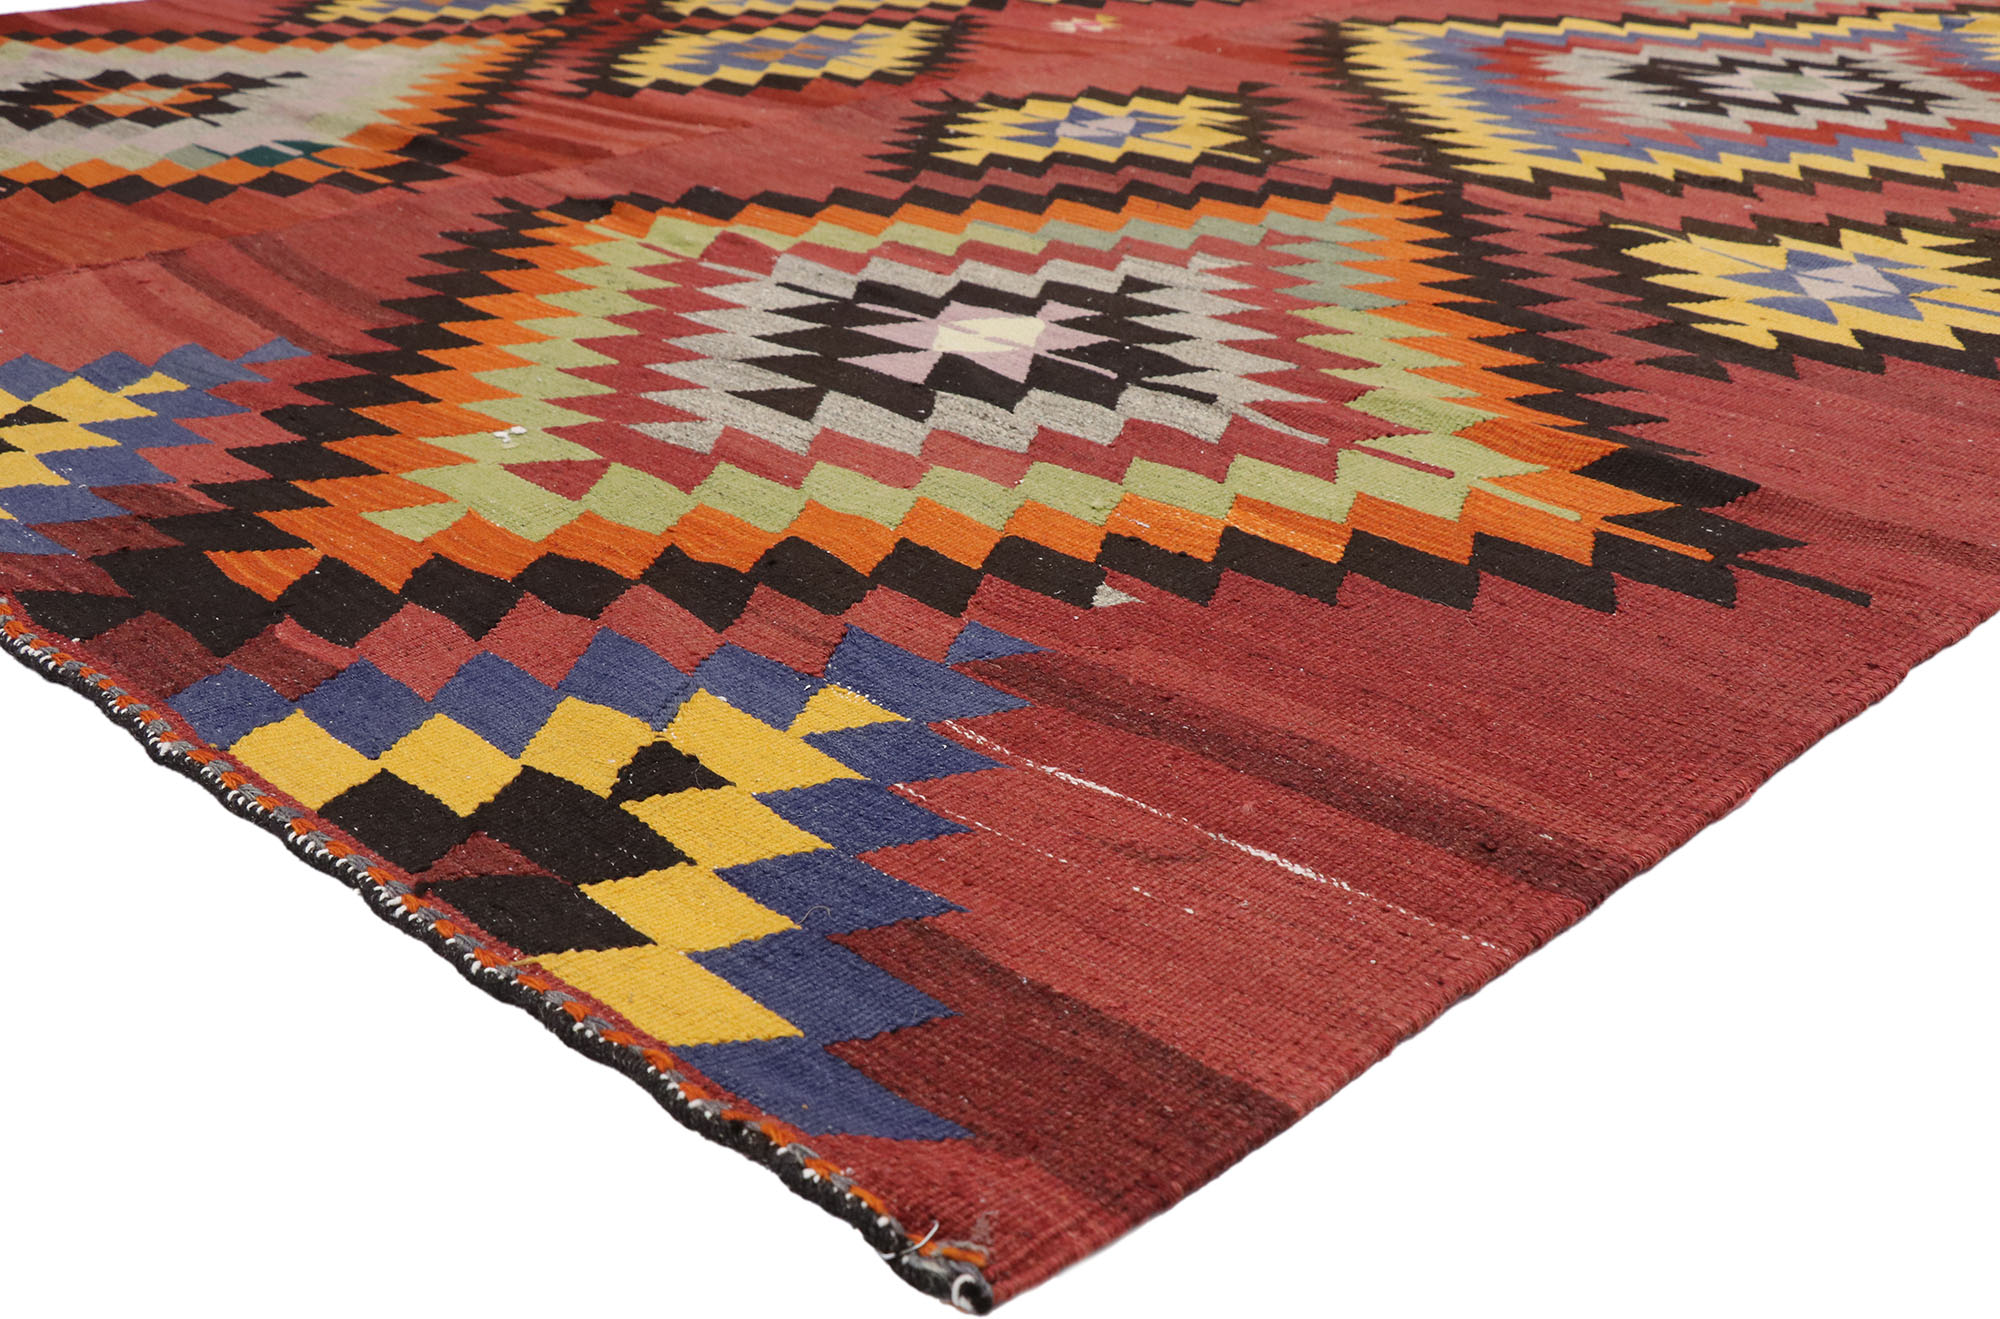 K0061907 Vintage Anatolian Kilim Rug - 7' 7 x 9' (91 x 108)  The Source  for Vintage Rugs, Tribal Kilim Rugs, Wool Turkish Rugs, Overdyed Persian  Rugs, Runner Rugs, Patchwork Rugs